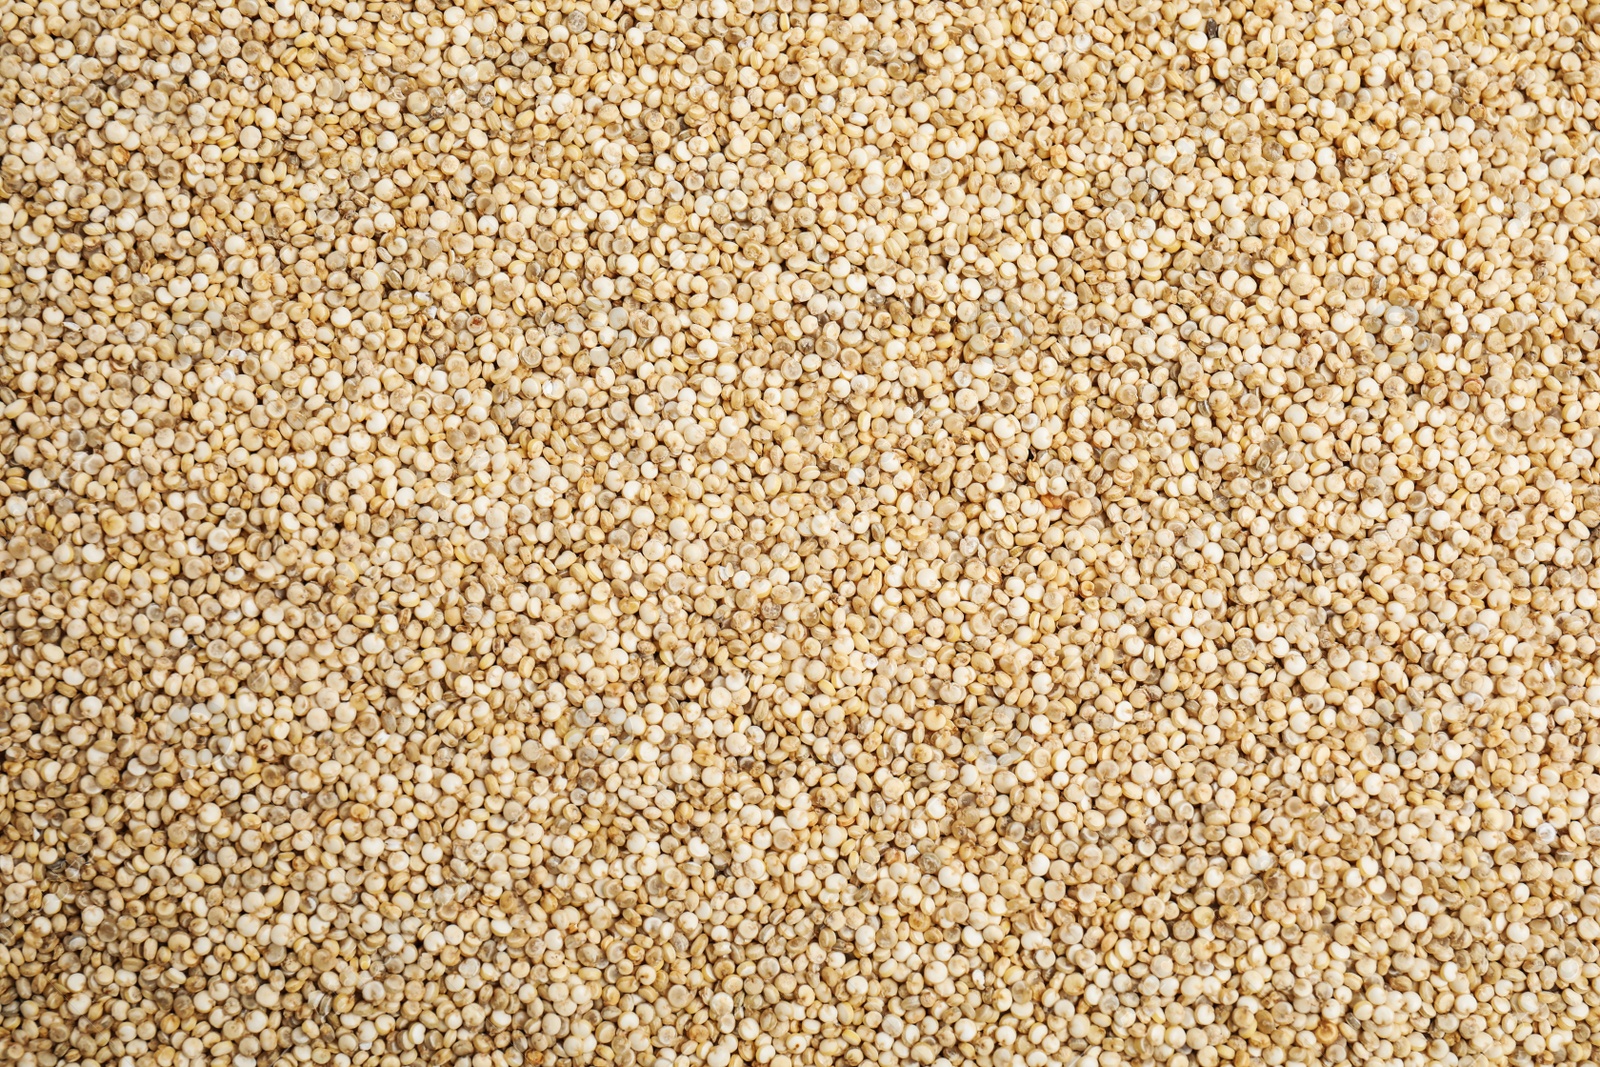 Photo of Heap of white quinoa as background, top view. Veggie seeds